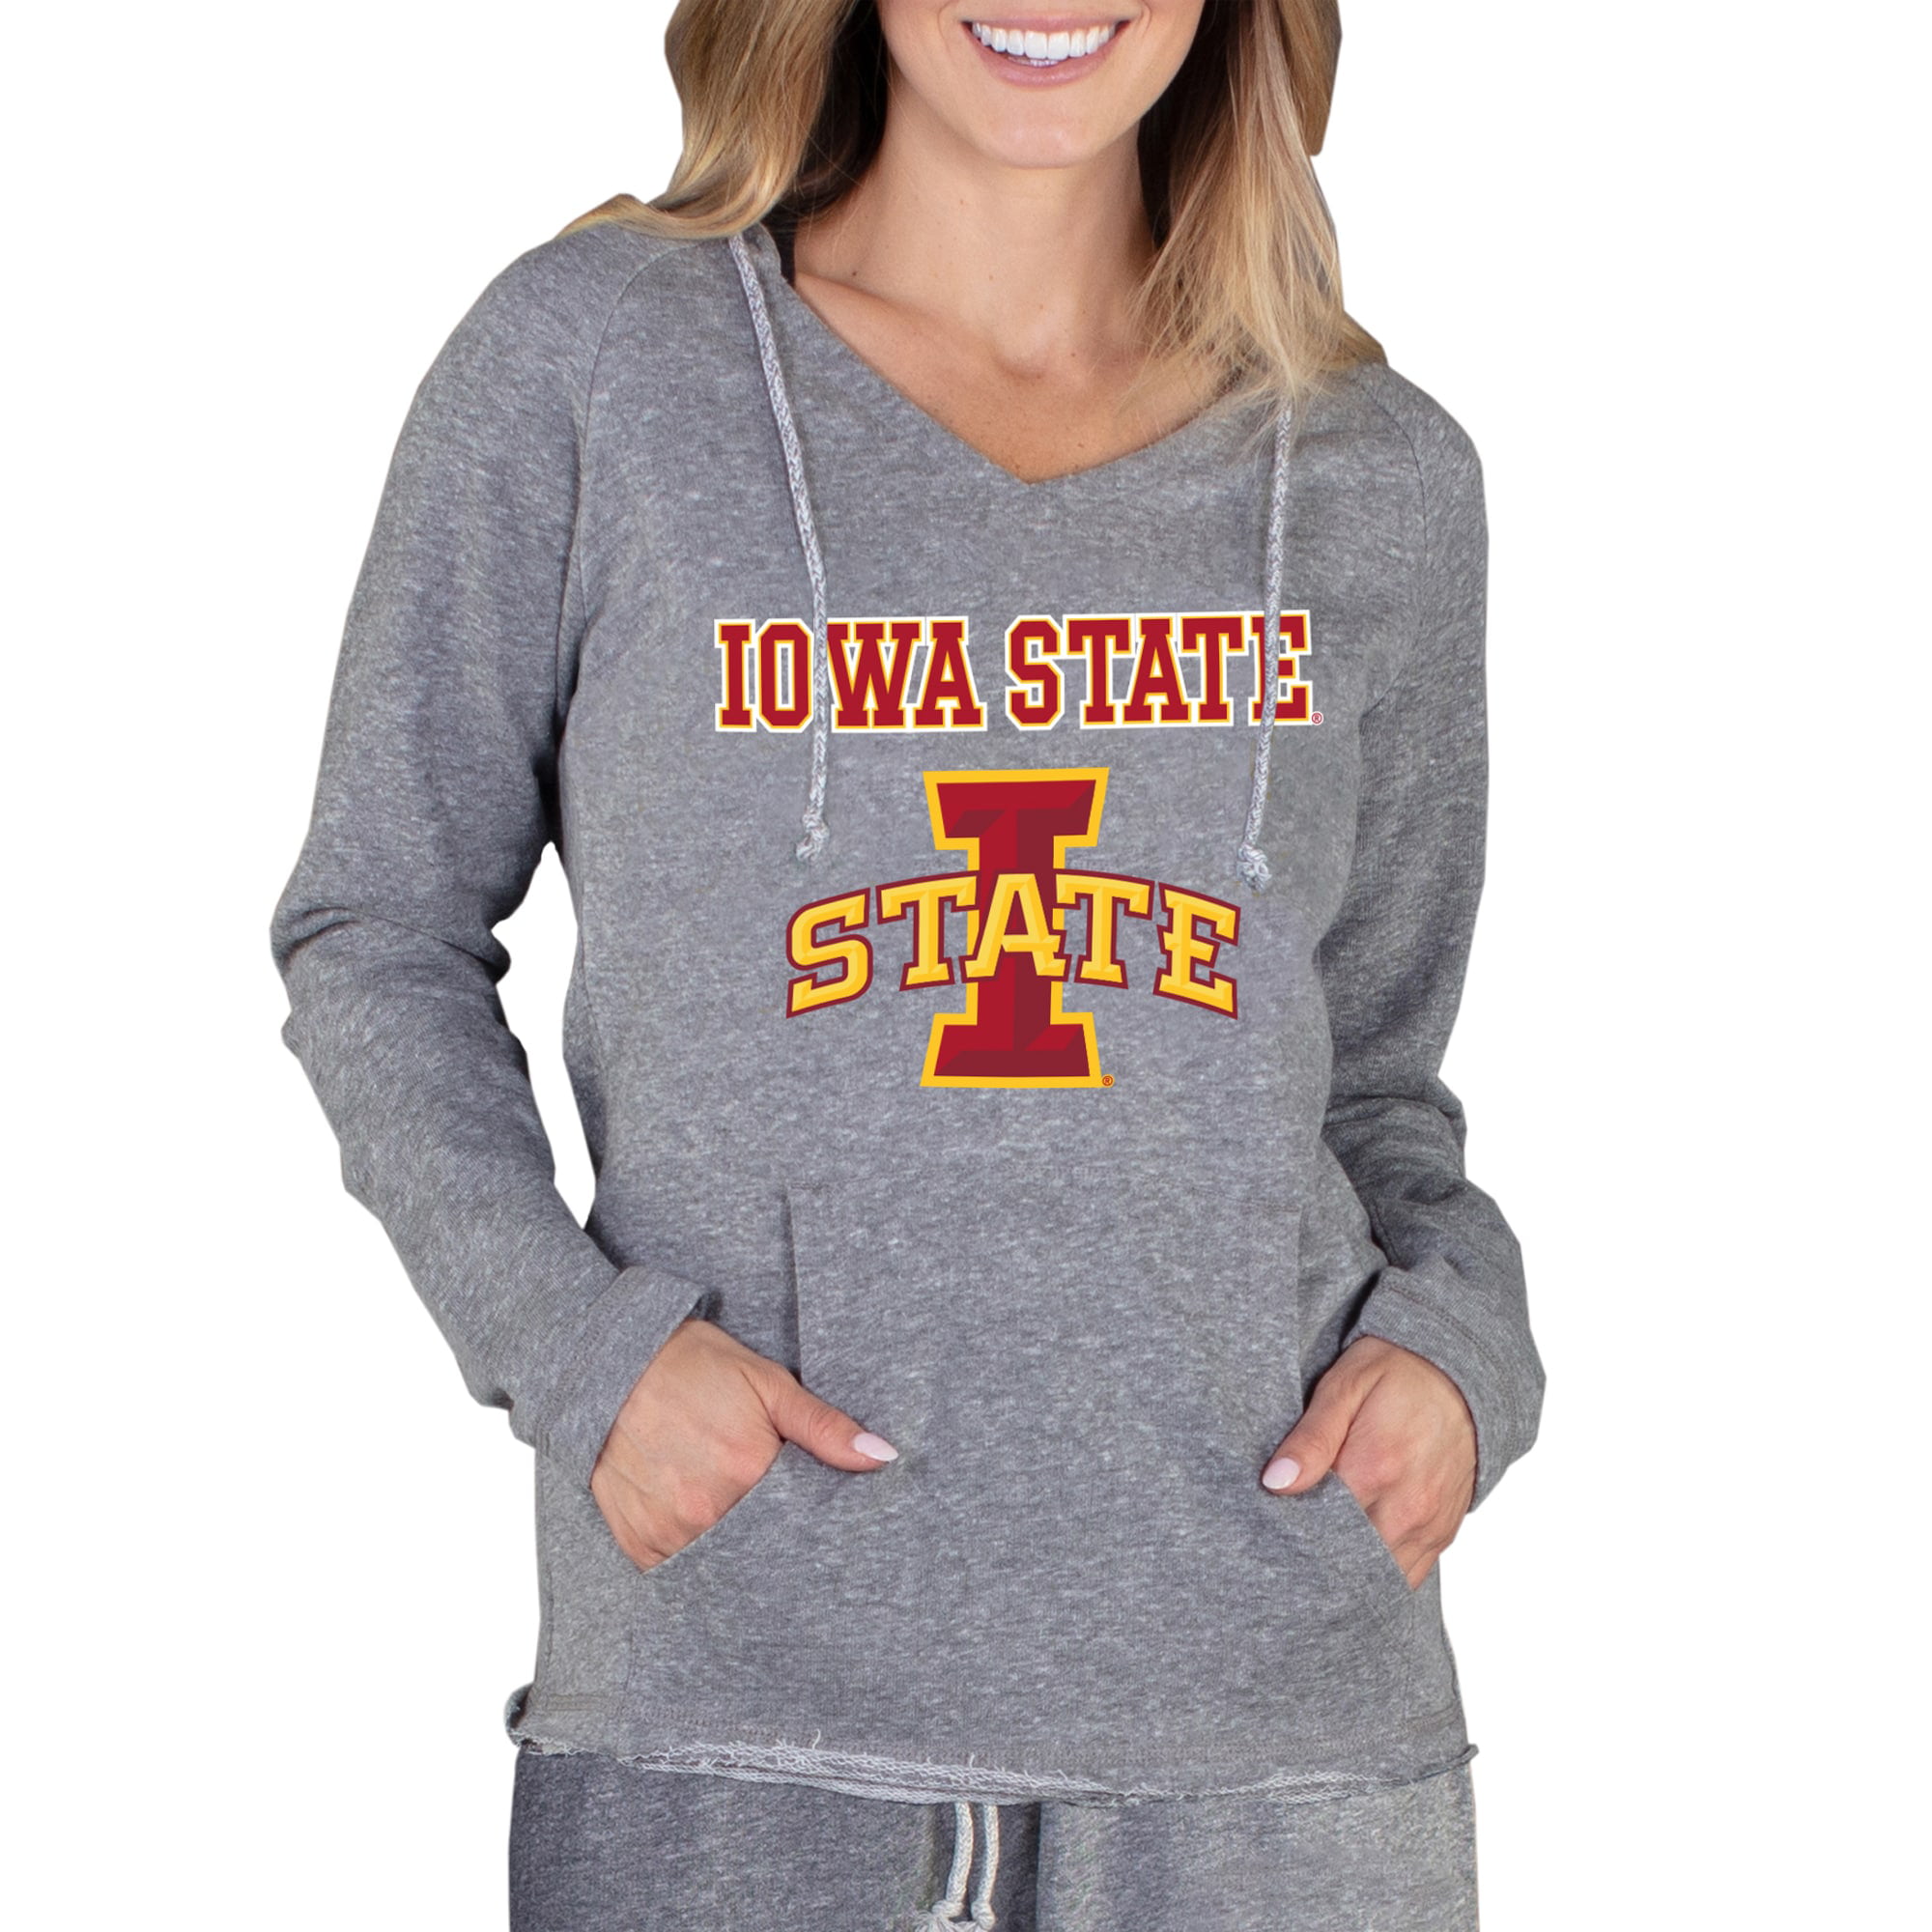 Fast Asleep Pjs Iowa State Cyclones Baby and Toddler Hooded